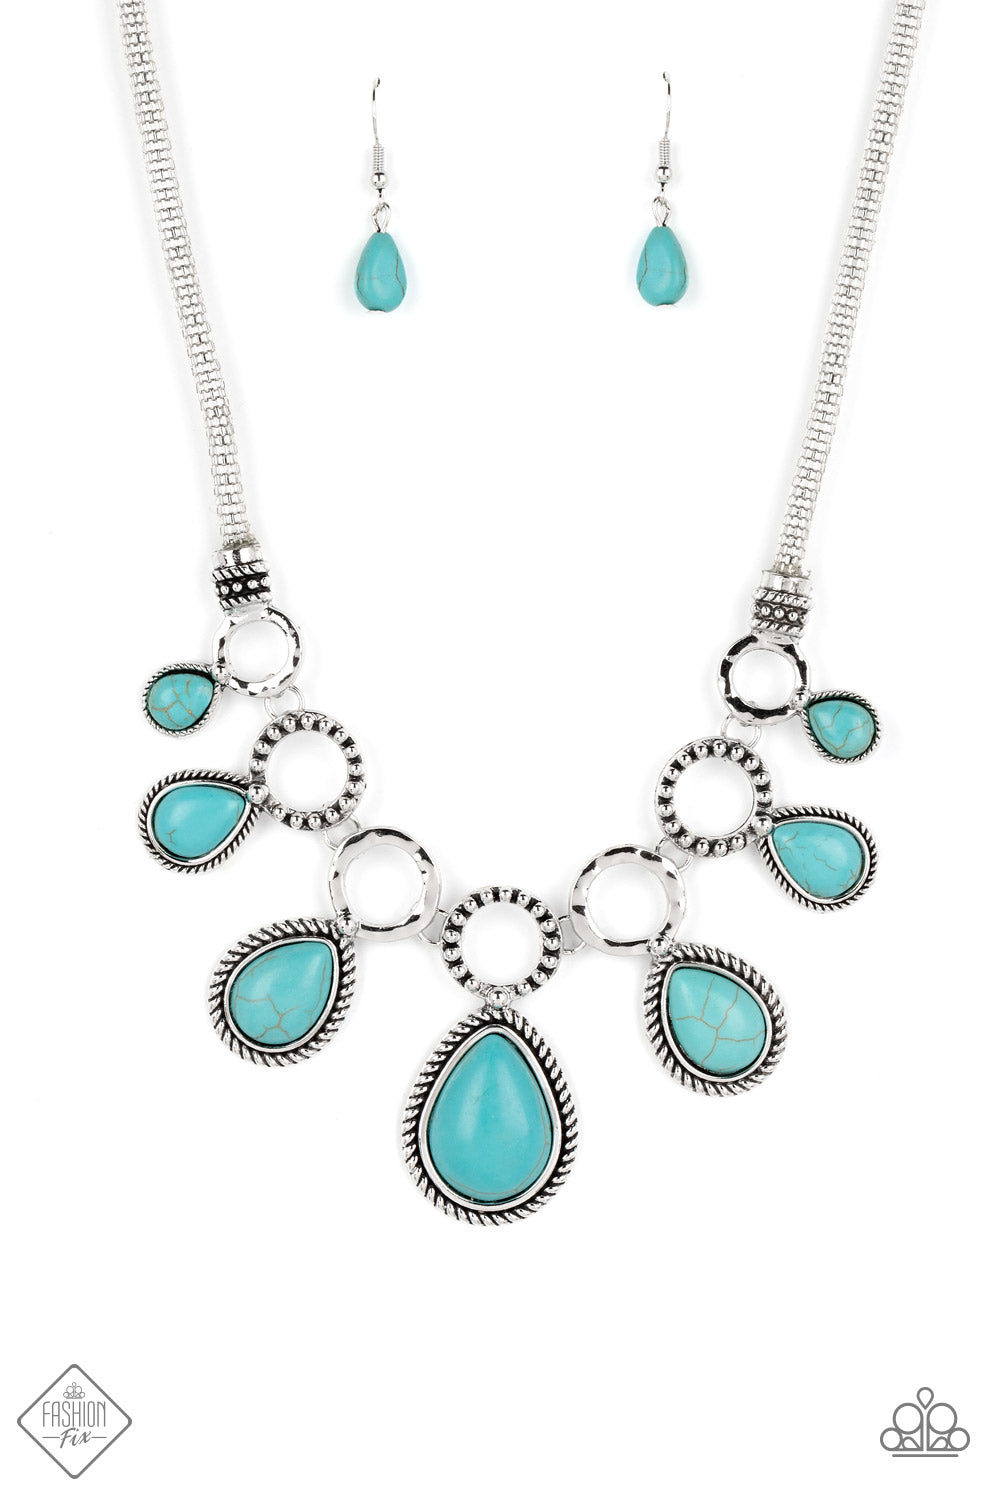 Riverside Relic Paparazzi Accessories Necklace with Earrings Blue